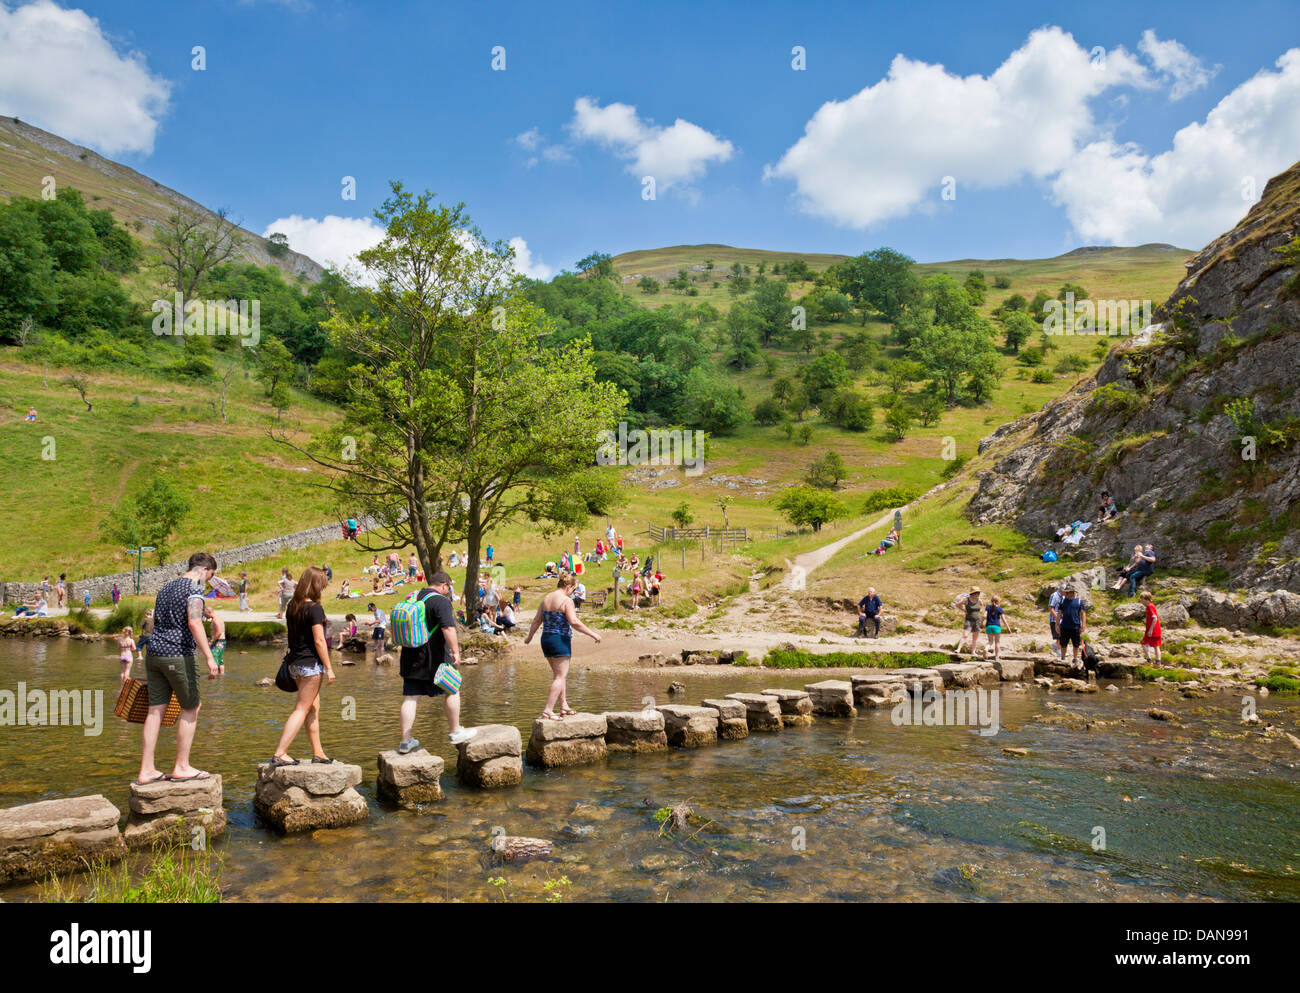 Tourists crossing River Dove on stepping stones in Dovedale Derbyshire peak district national park England UK GB EU Europe Stock Photo